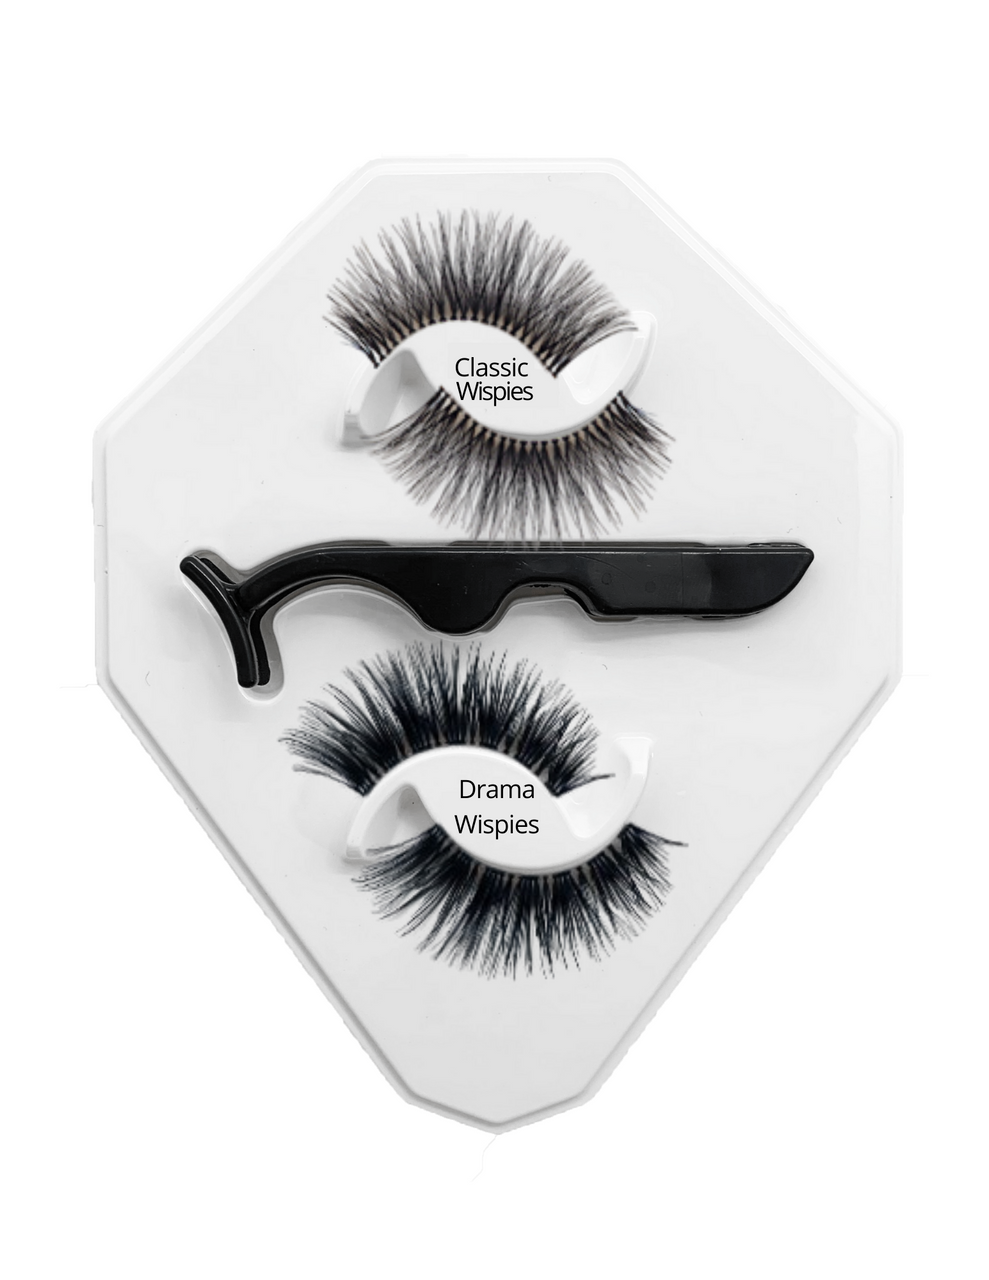 JLASH Applicator And 2 Pairs Lashes Classic Wispies and Drama Wispies - DA3